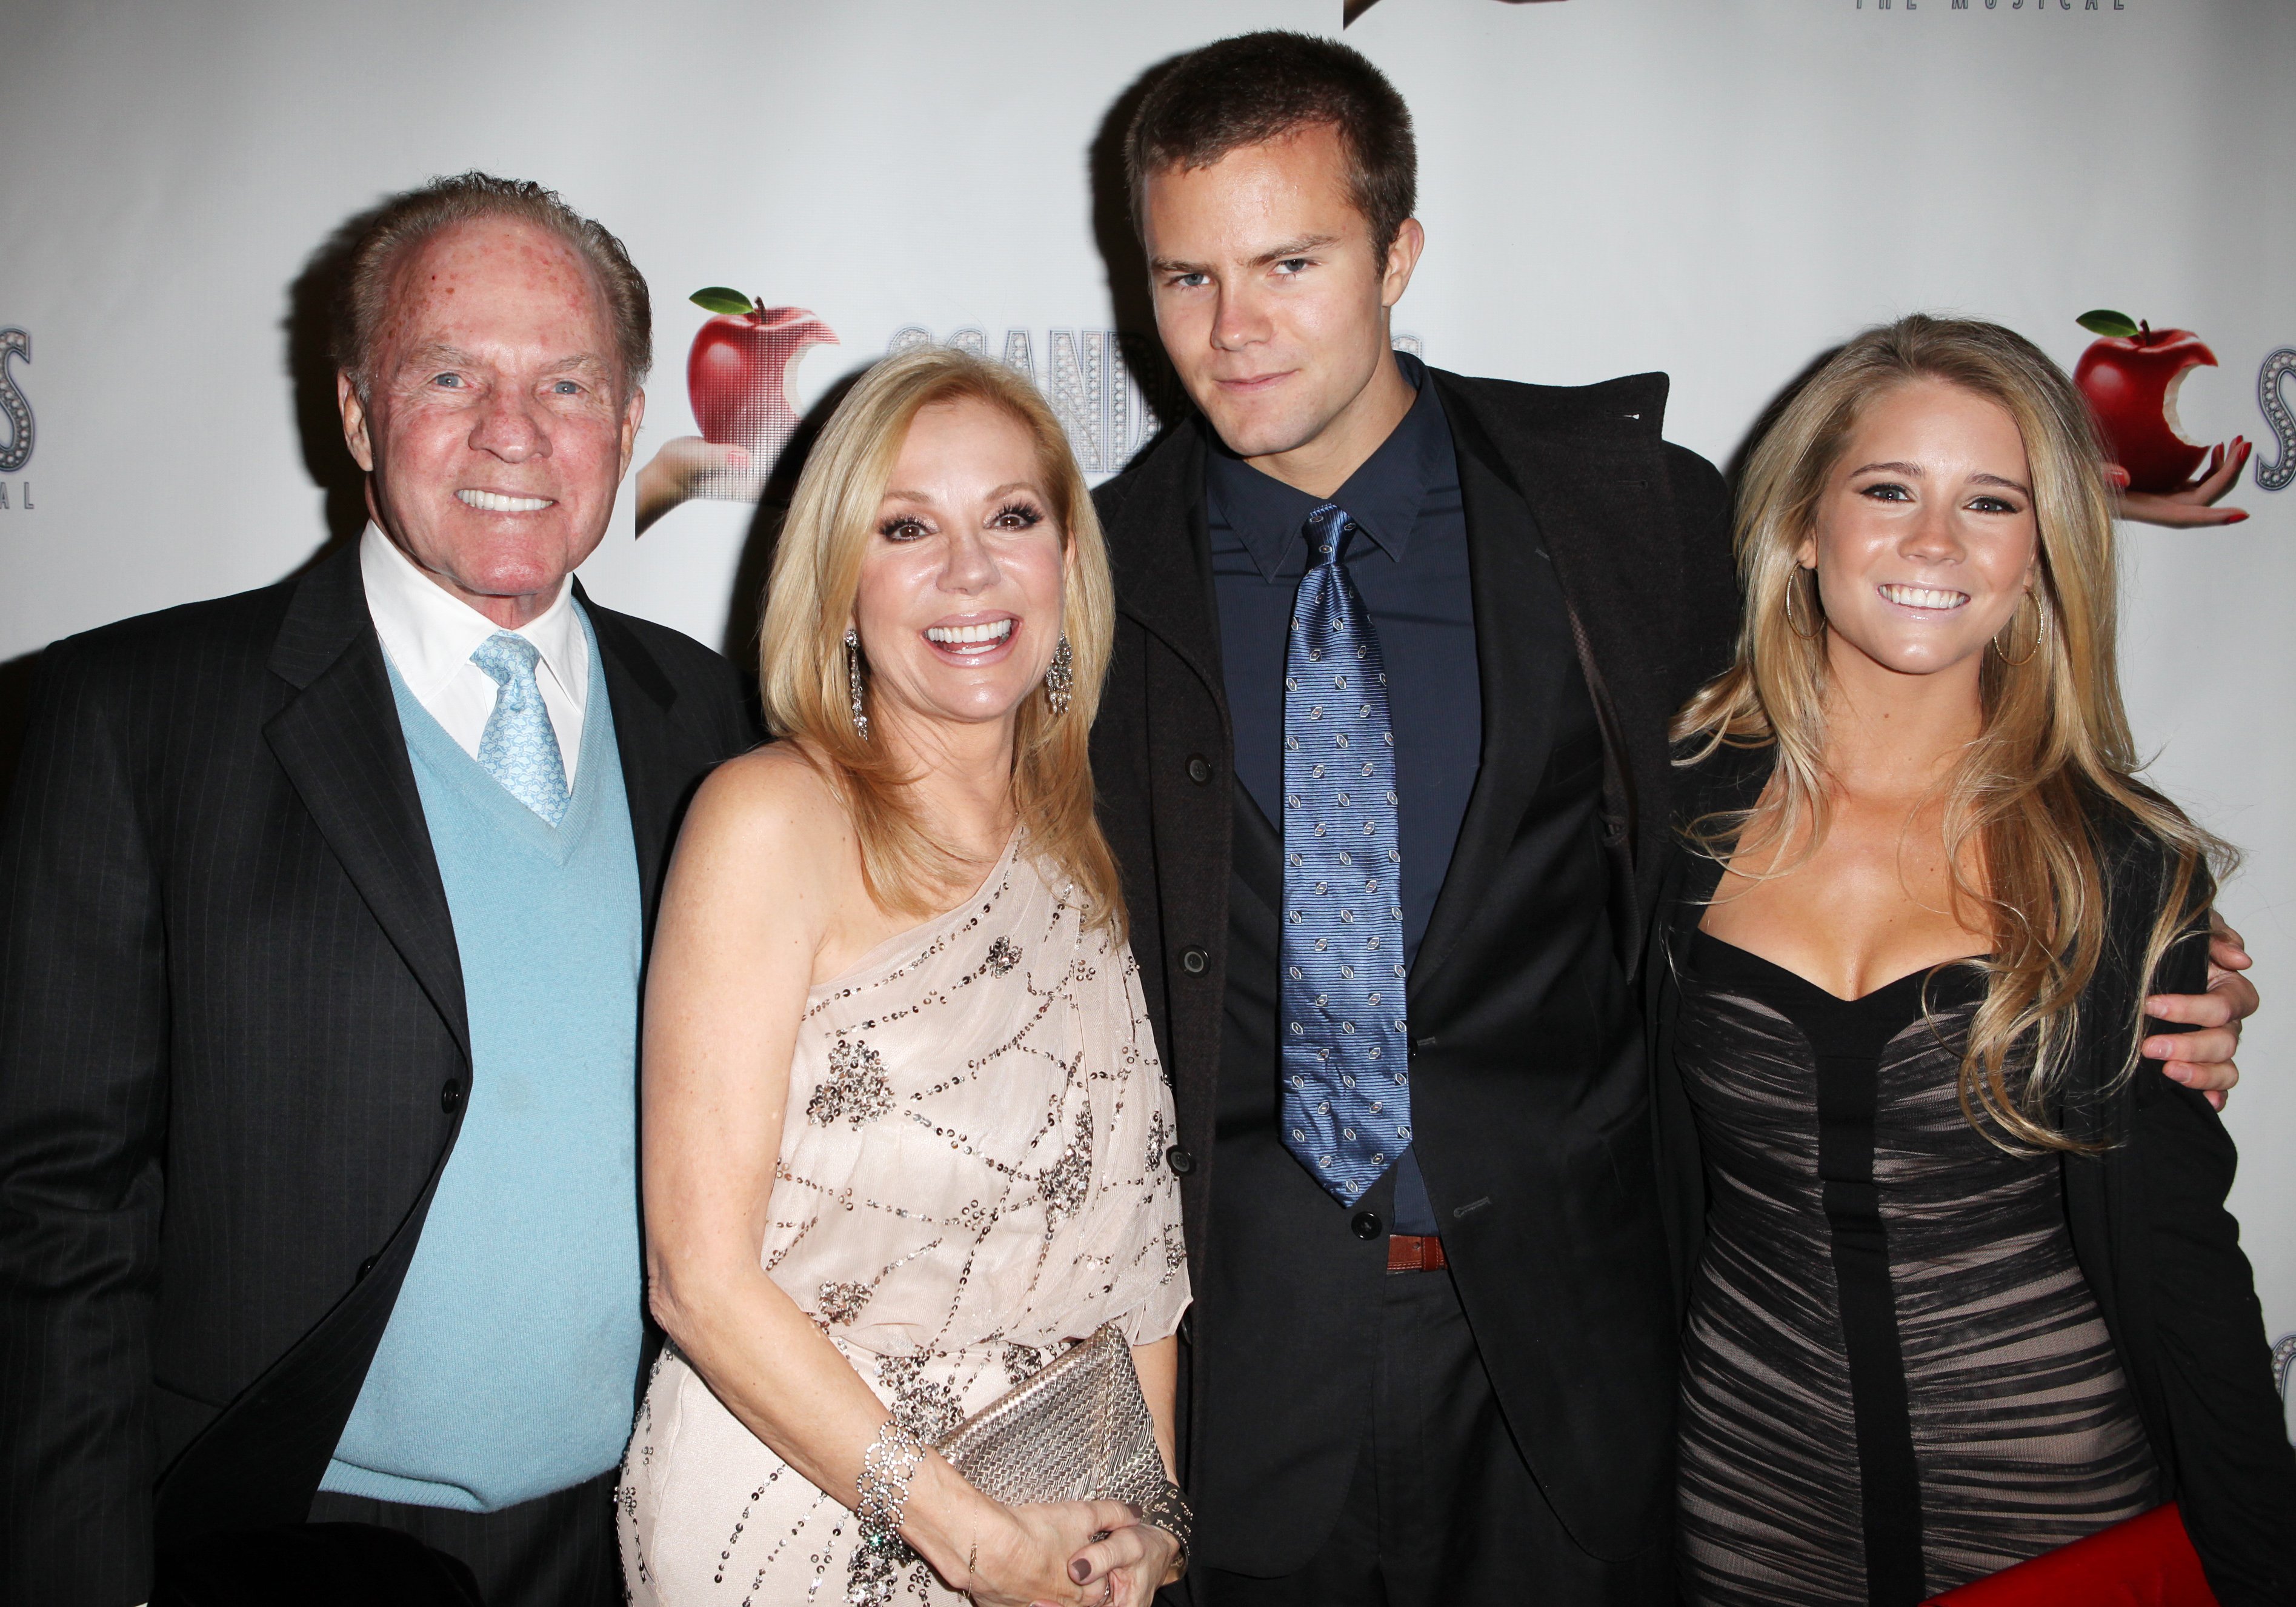 Frank, Kathie Lee, Cody, and Cassidy Erin Gifford at the Broadway Opening Night Performance After Party for "Scandalous The Musical" in New York City on November 15, 2012 | Source: Getty Images